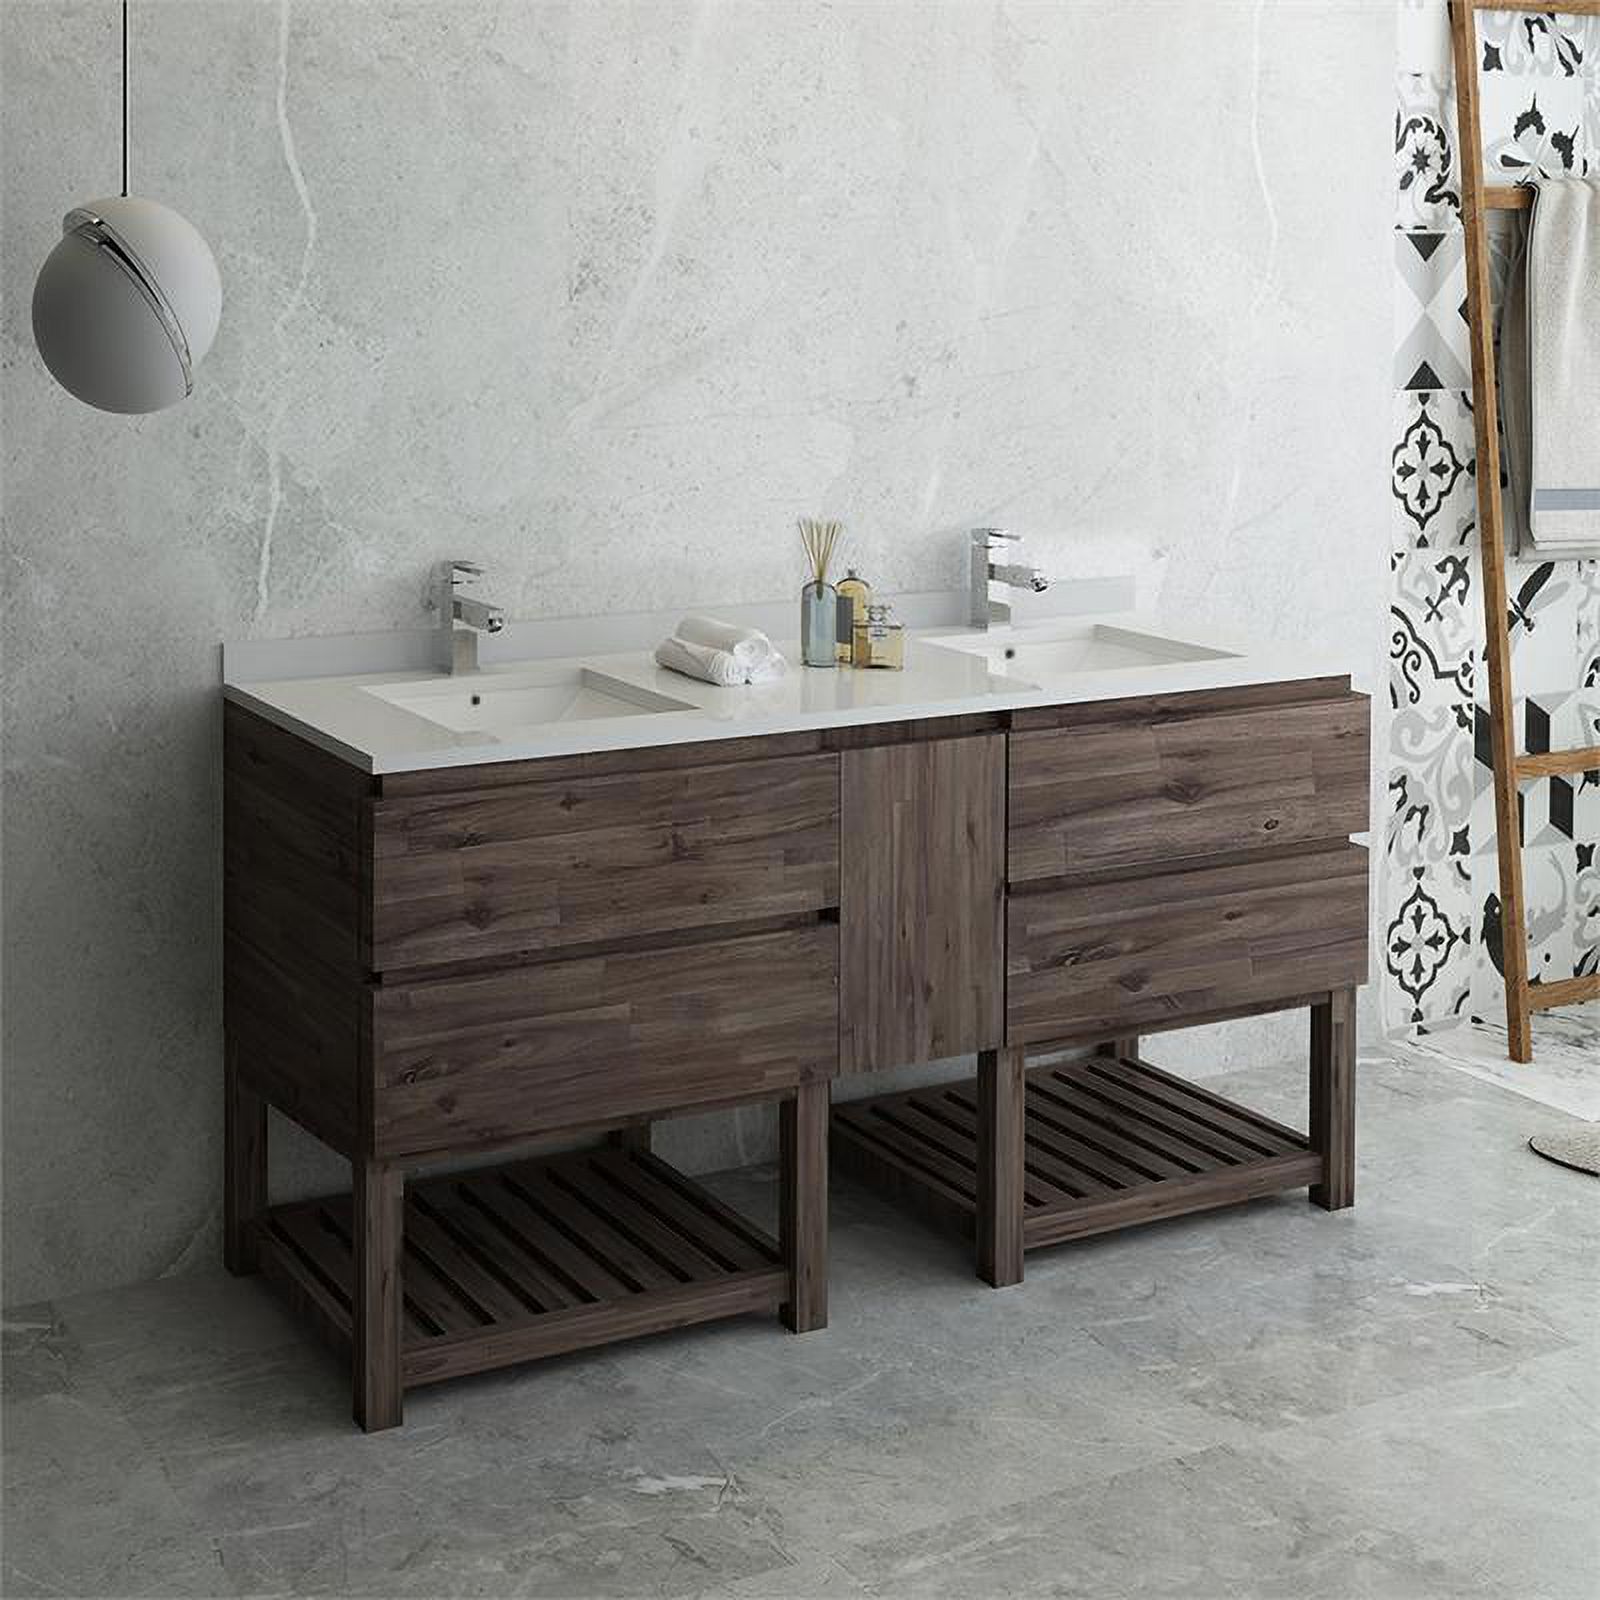 Fresca Formosa 72" Double Sinks Modern Acacia Wood Bathroom Cabinet in Brown - image 2 of 10